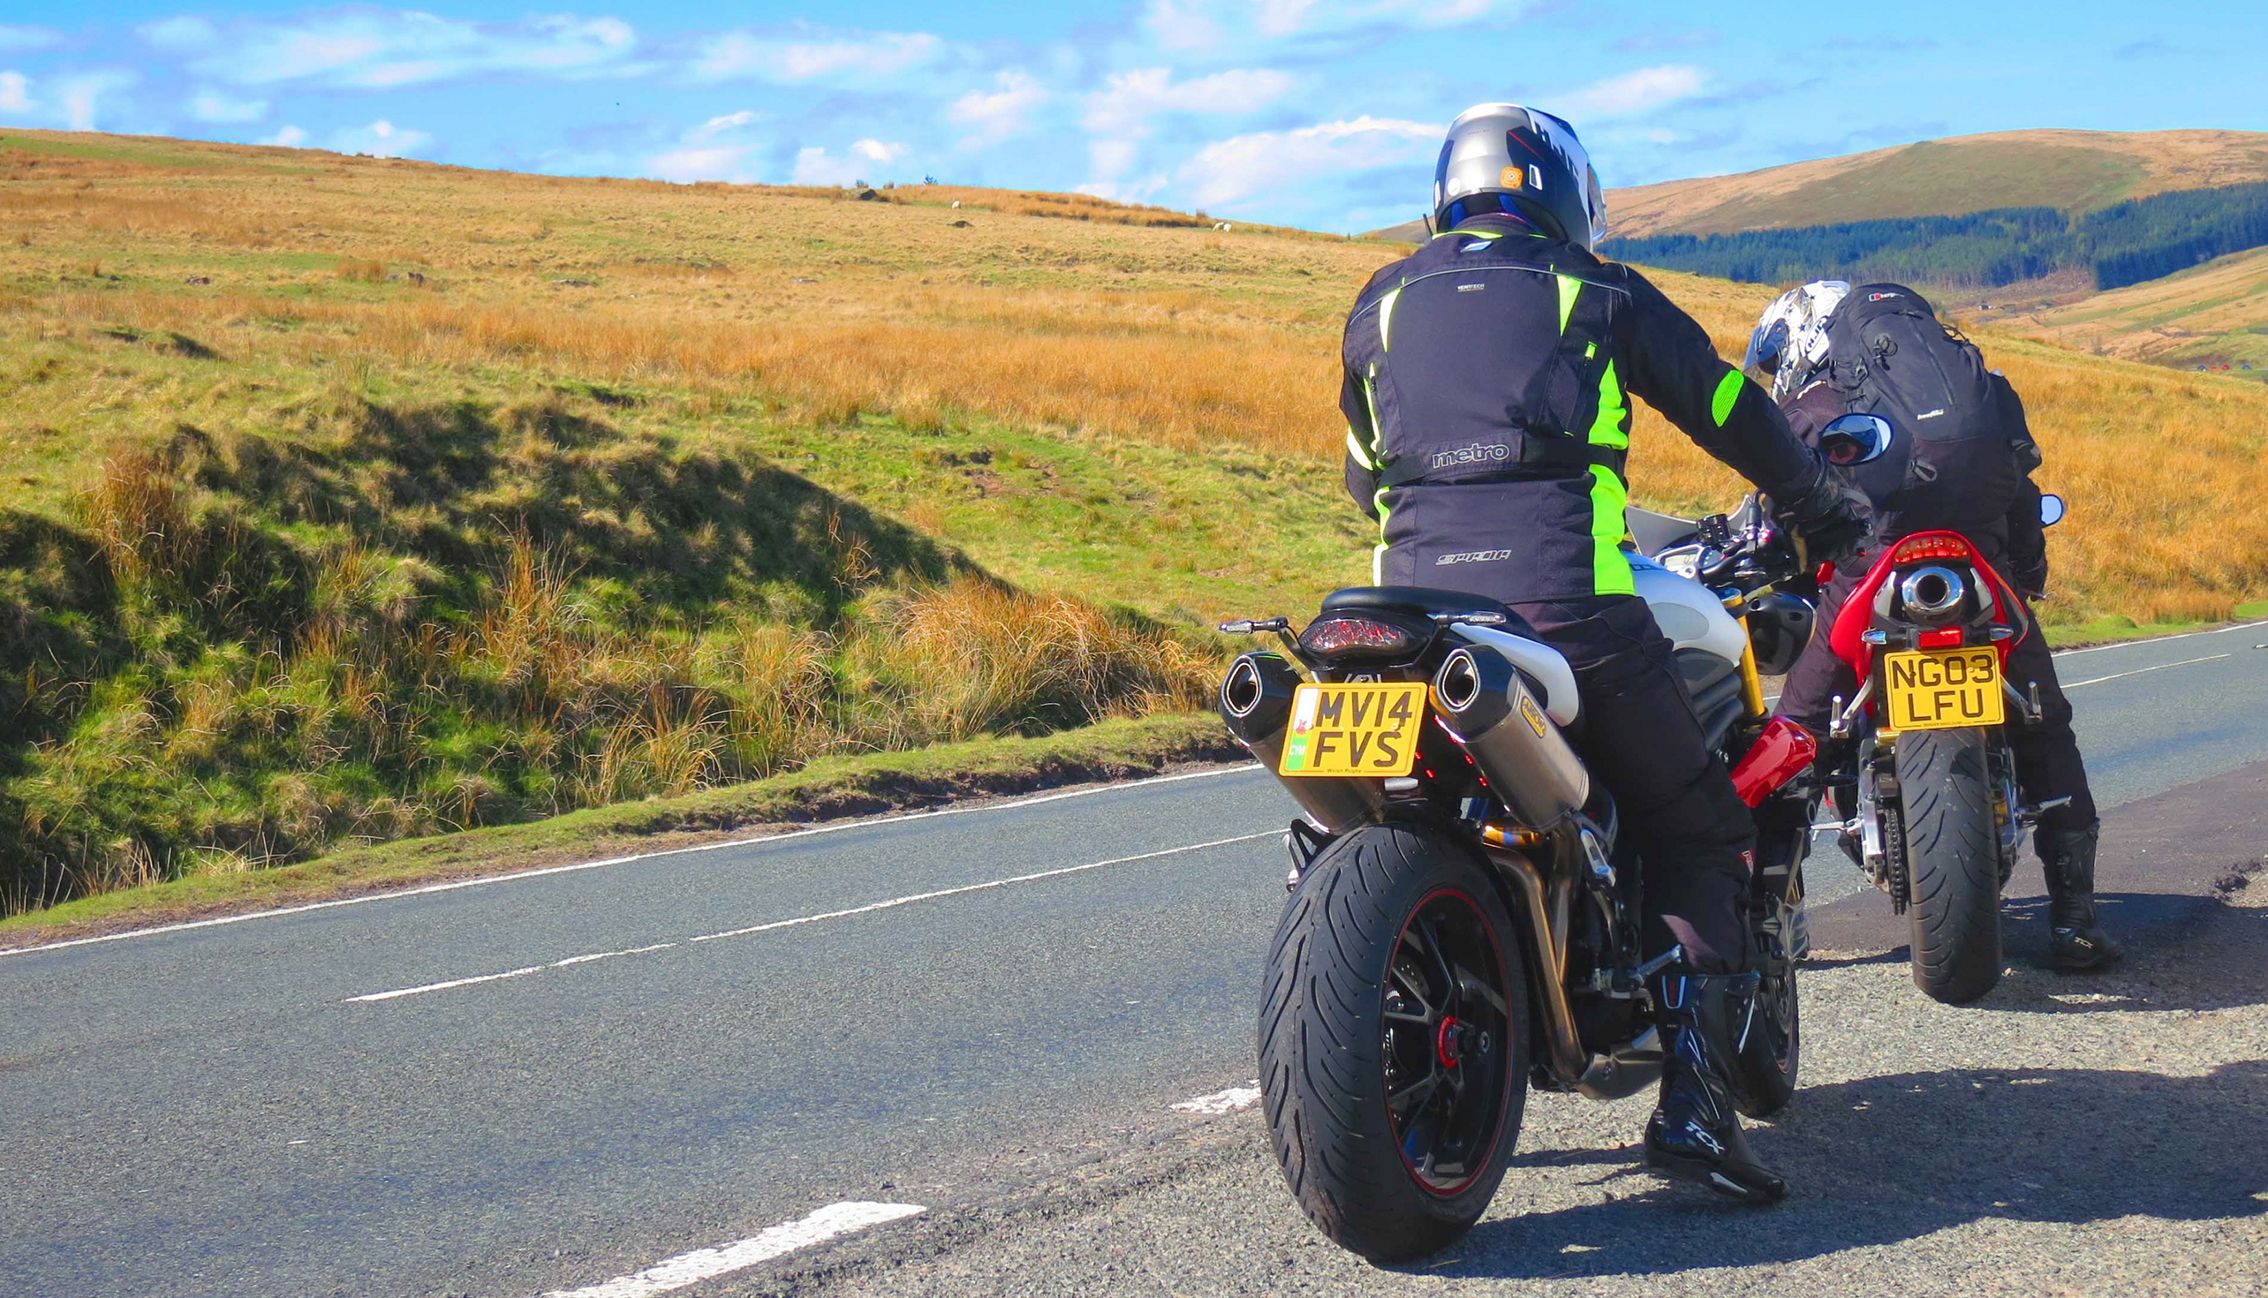 ON THE ROAD: Assist is keen to reduced motorcyclist casualties as the new riding season gains momentum